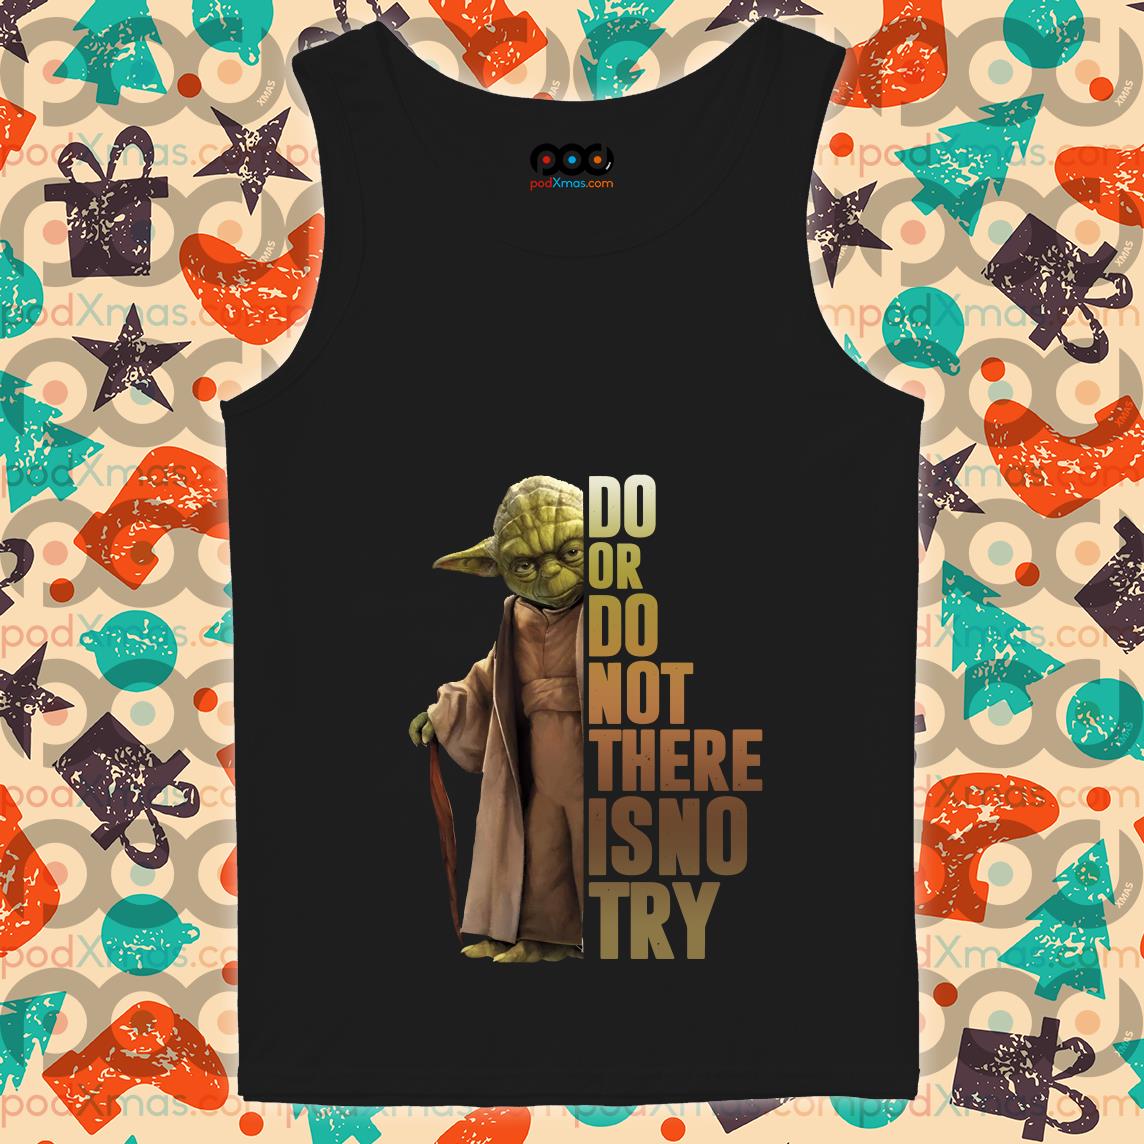 Baby Yoda Warrior Culture Gear Try Not Do Or Do Not There Is No Try Master Yoda  Shirt - Tagotee